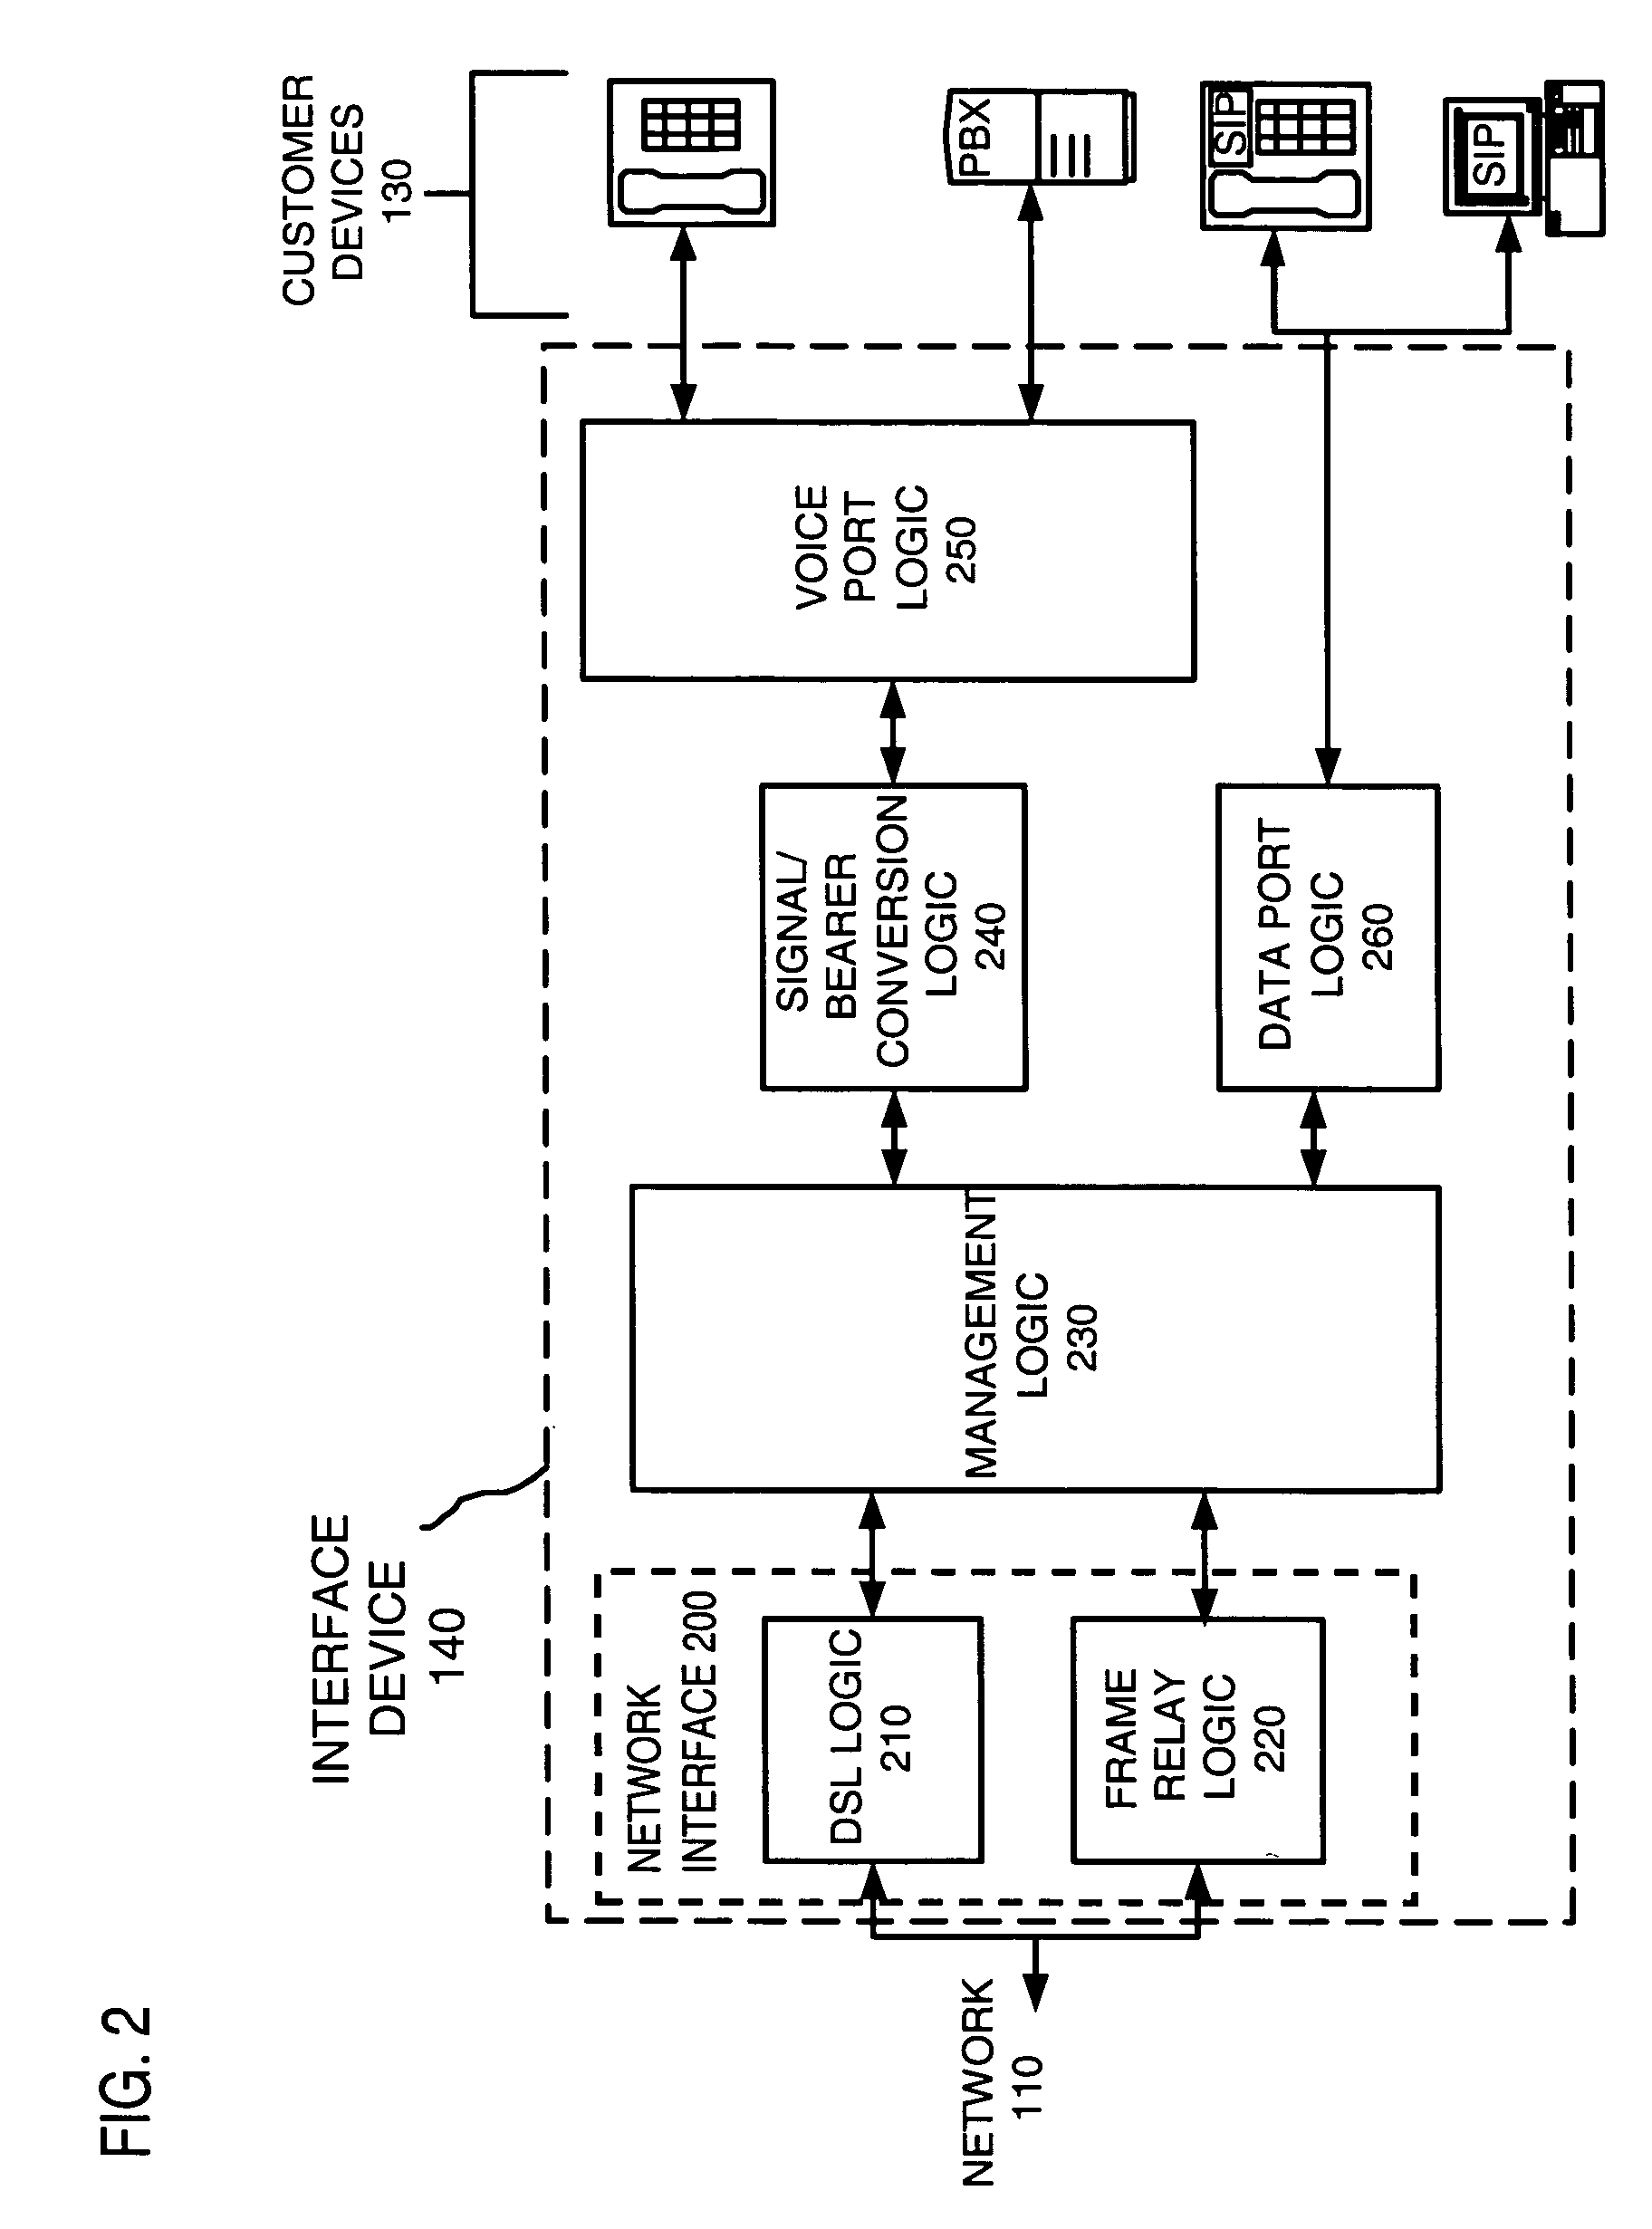 Method and apparatus for providing integrated voice and data services over a common interface device